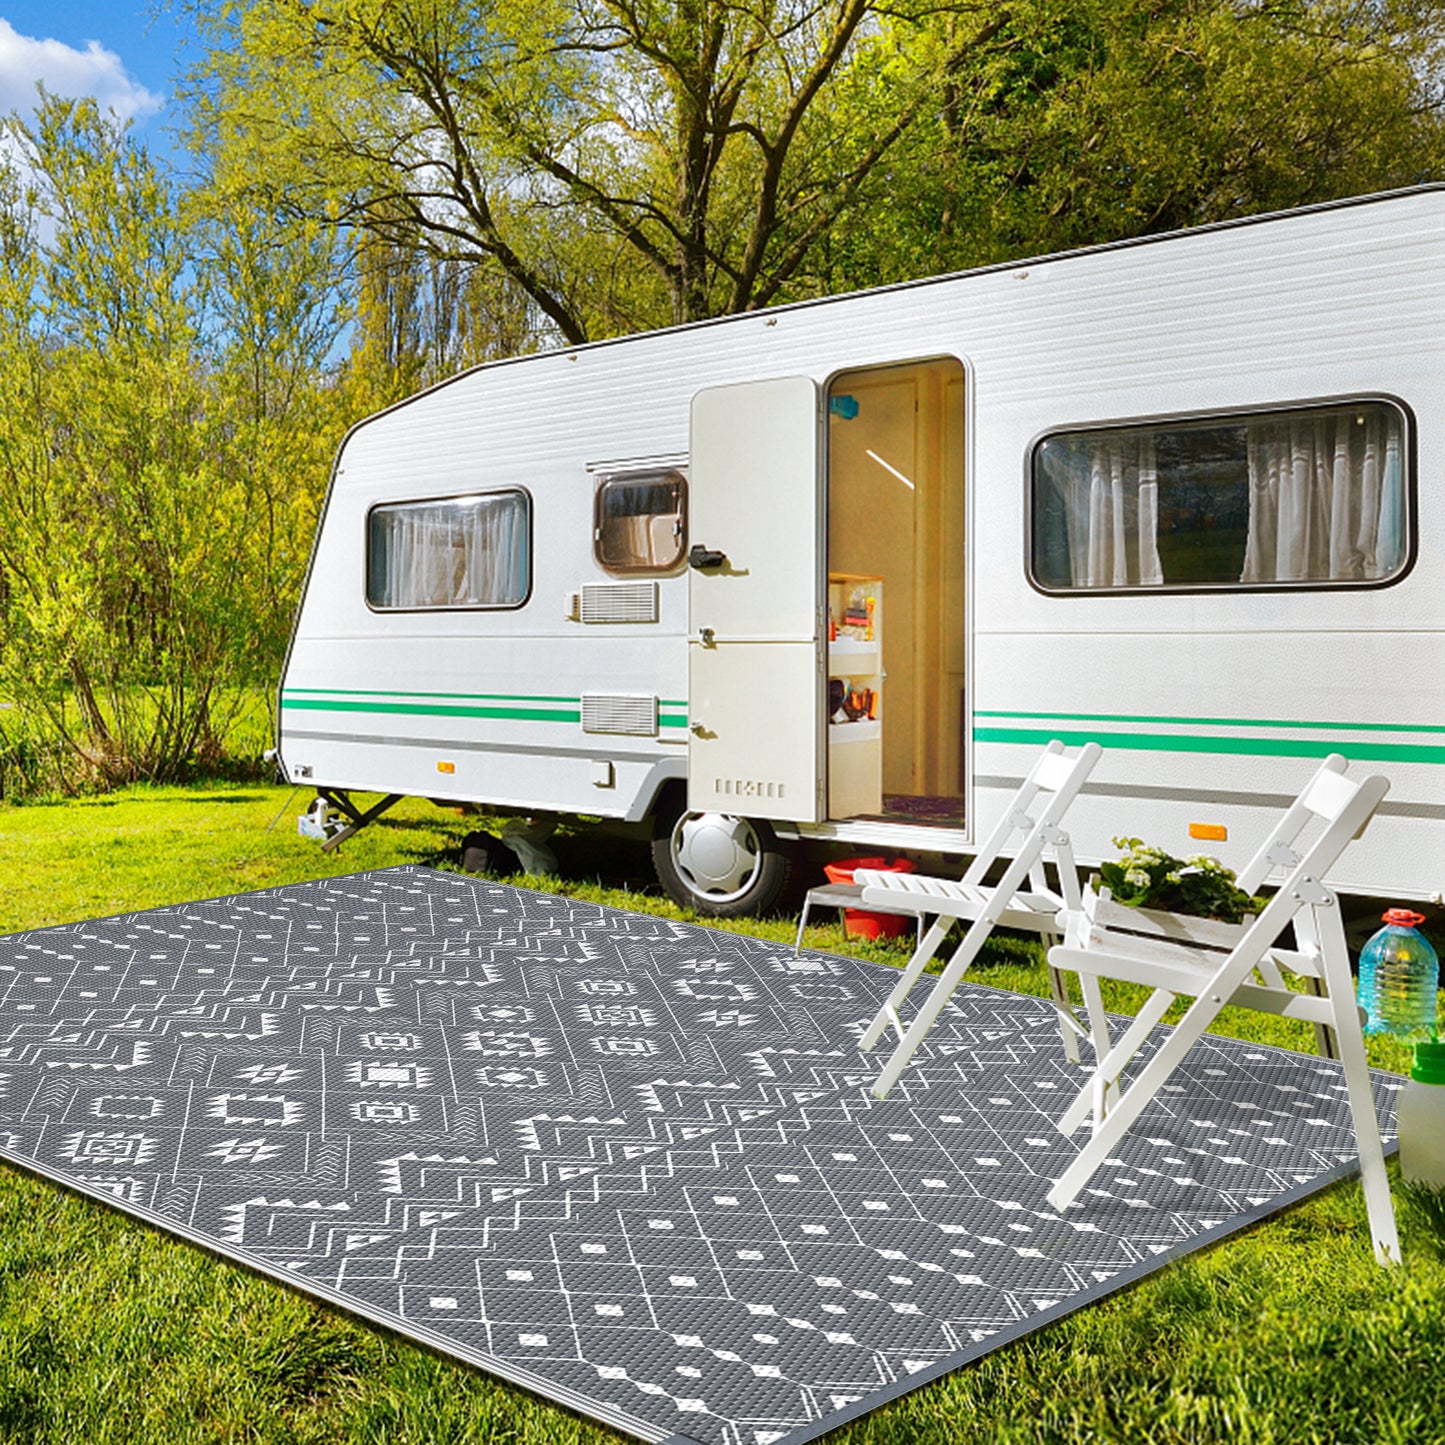 GENIMO Outdoor Rug for Patio Clearance, Waterproof Reversible Outside Carpet for Outdoor Decor, Area Boho Rug, Plastic Straw Mat for RV, Deck, Patio, Camping, Camper